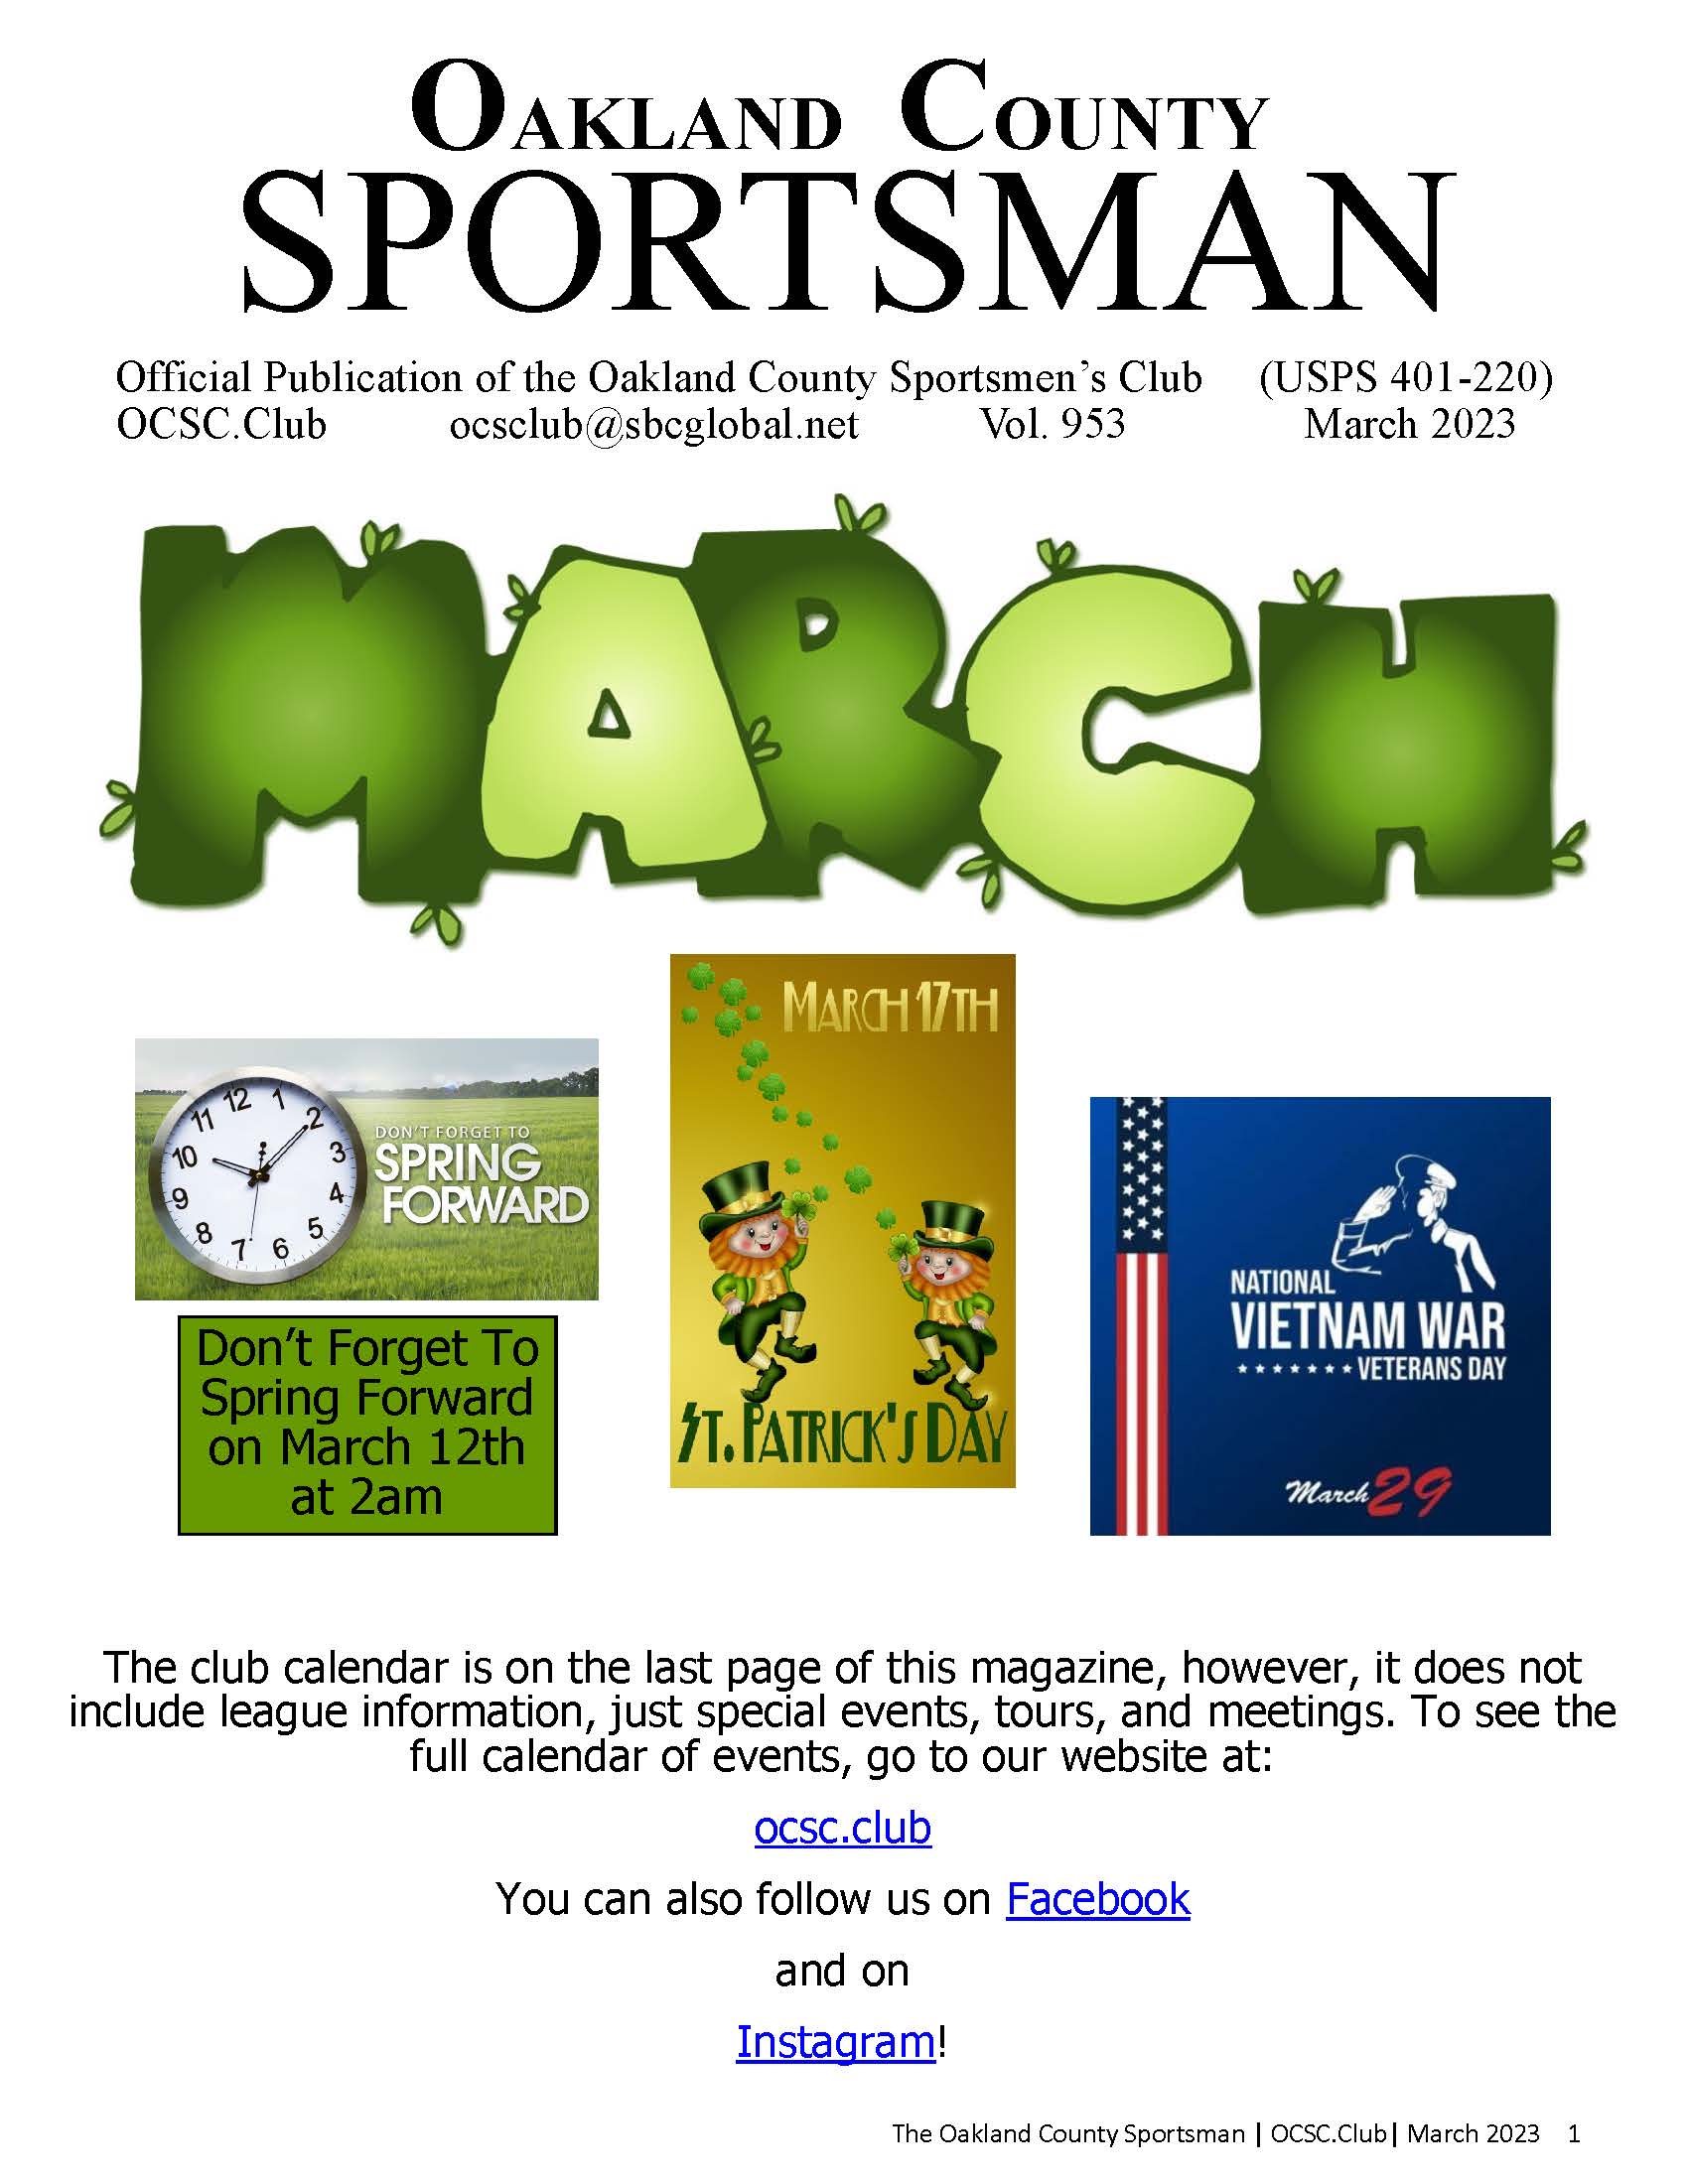 See whats happening at the club in March!